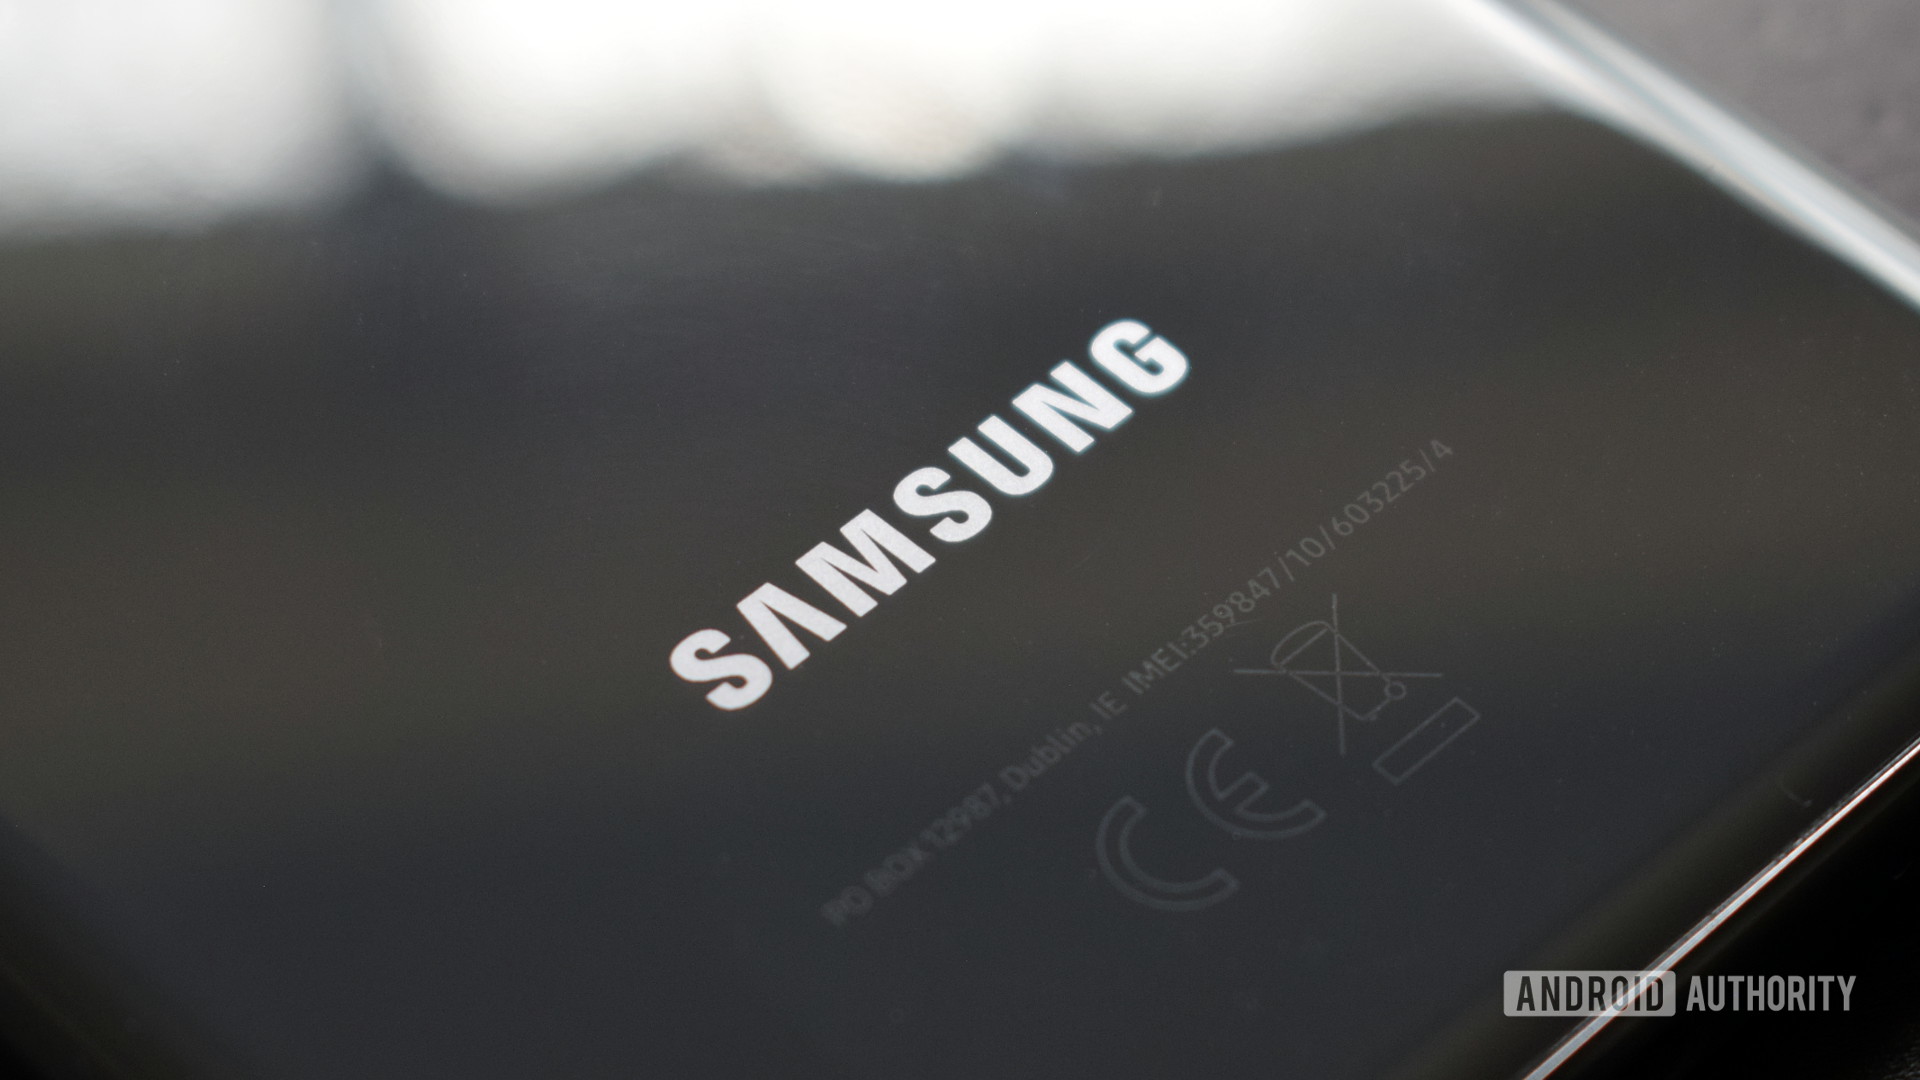 Samsung logo on the back of the Galaxy S20 